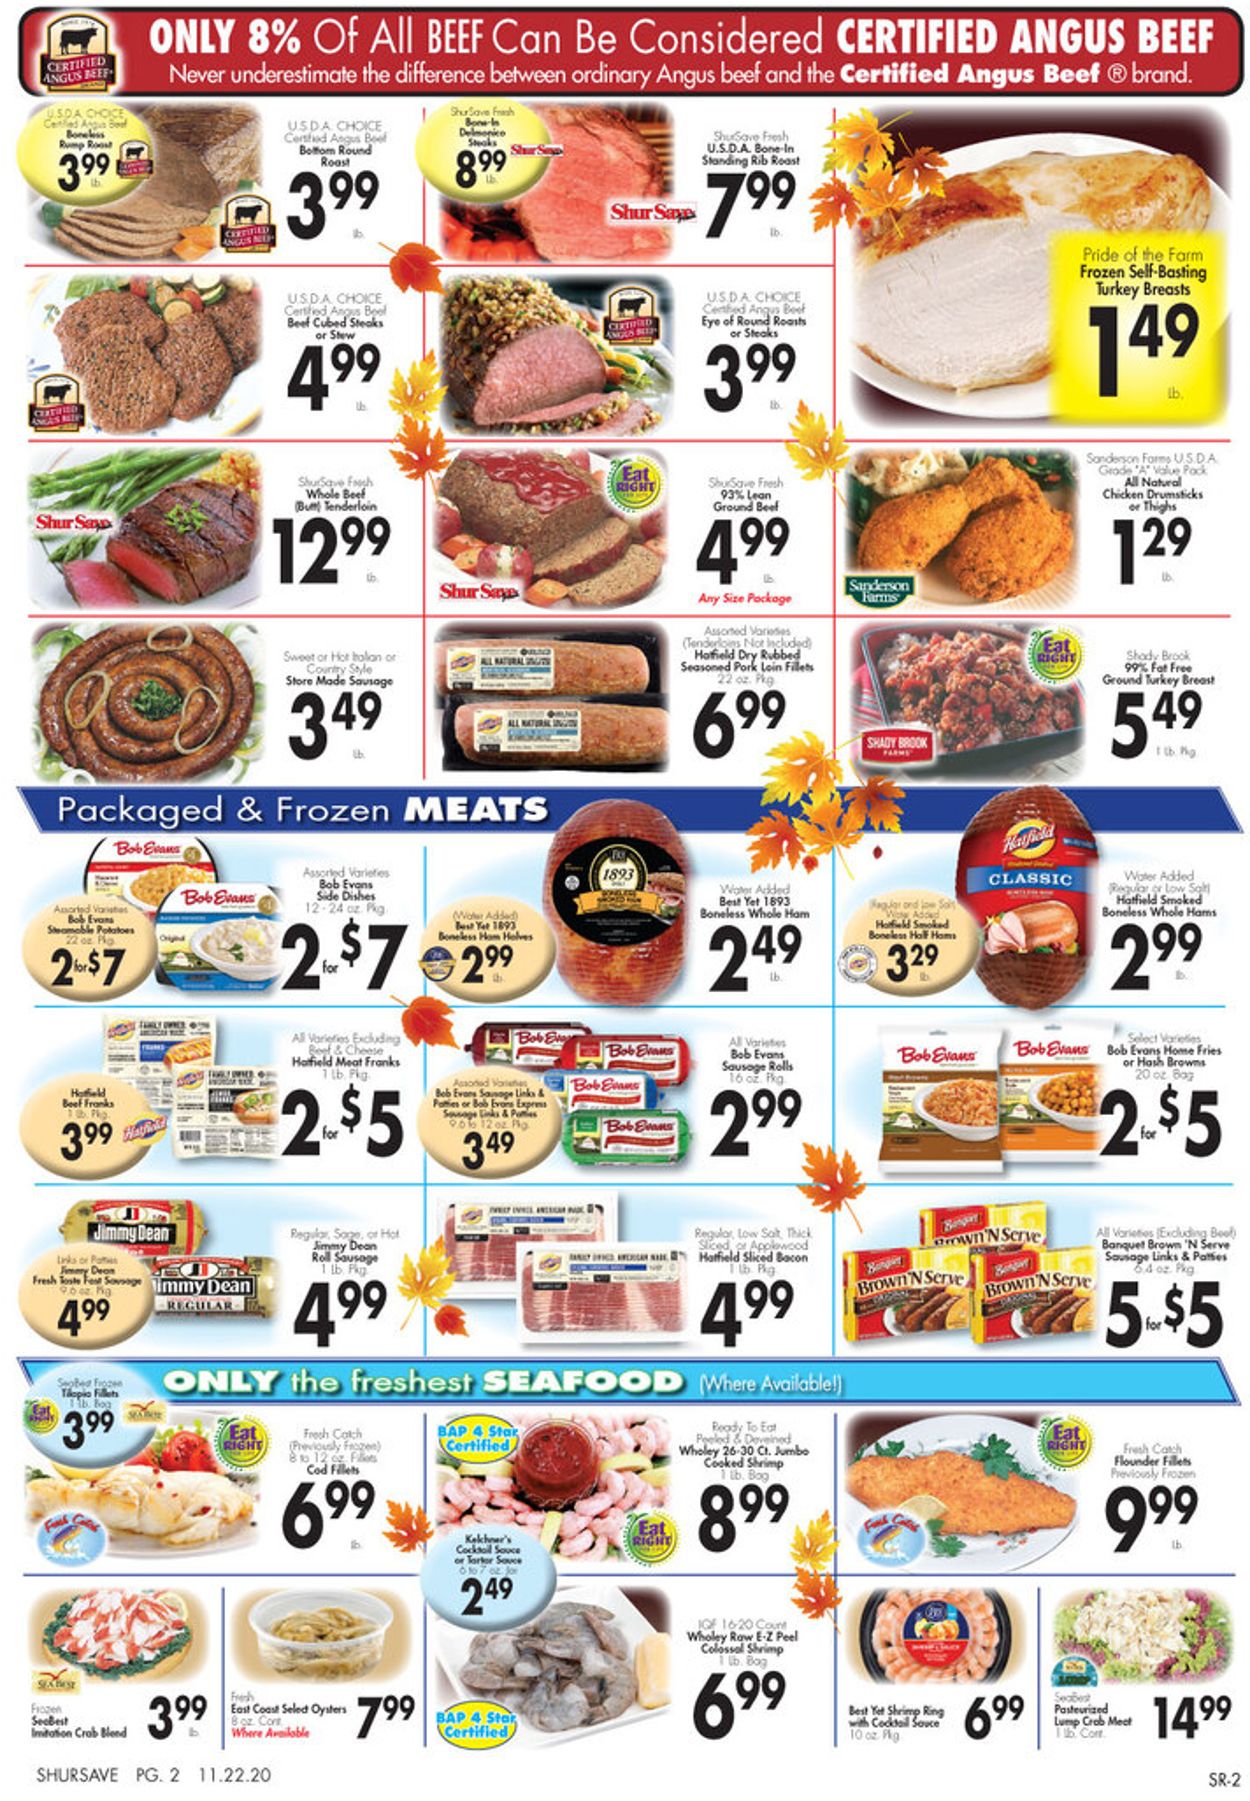 Gerrity's Supermarkets Thanksgiving 2020 Weekly Ad Circular - valid 11/22-11/28/2020 (Page 3)